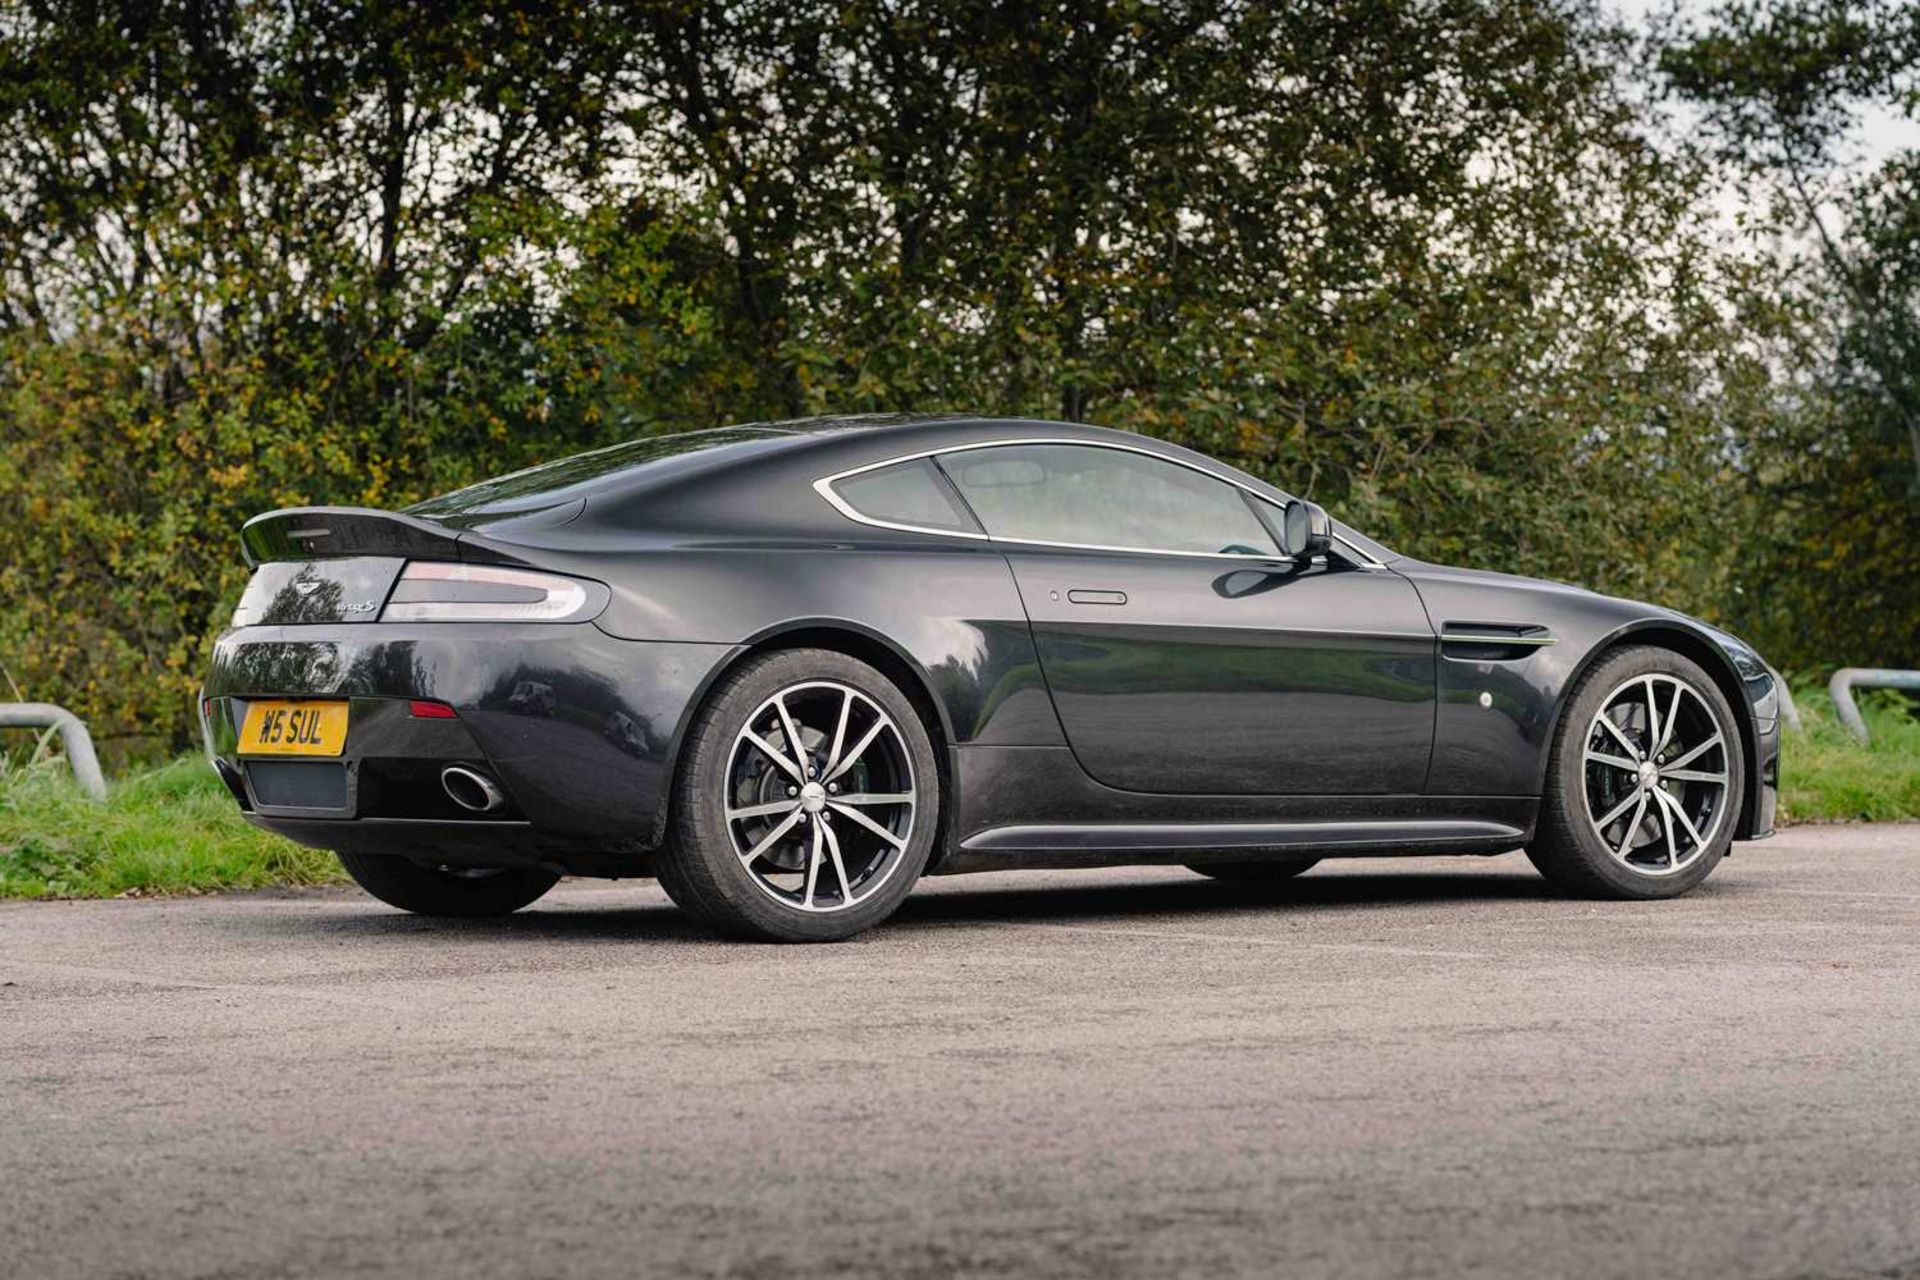 2013 Aston Martin Vantage S SP10 Warranted 15,600 miles from new - Image 12 of 60